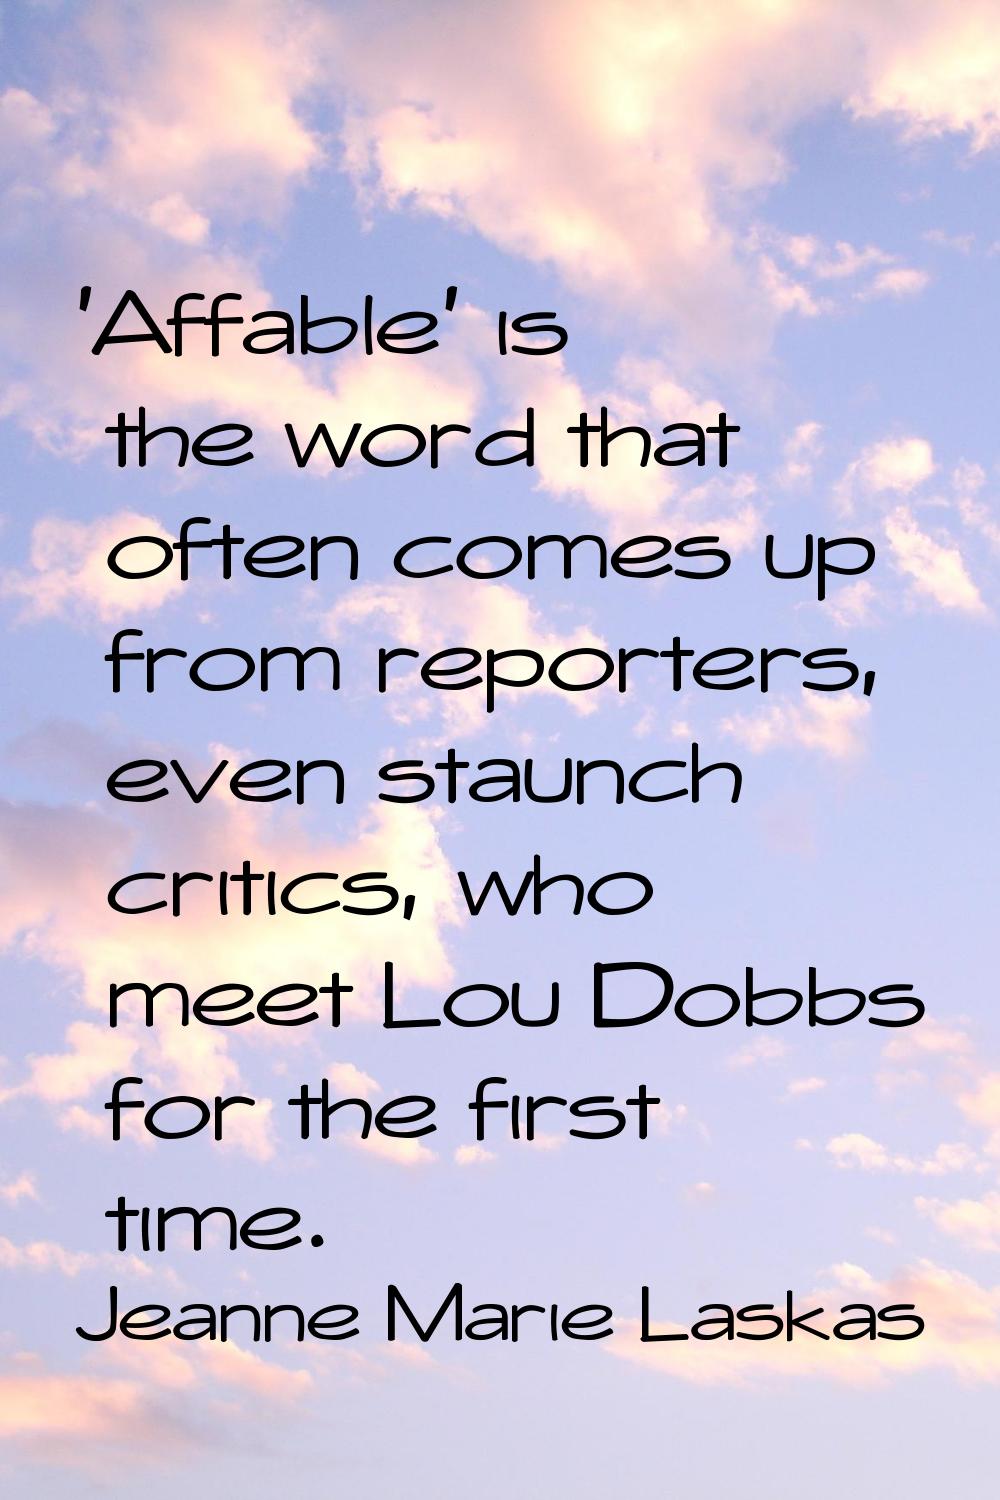 'Affable' is the word that often comes up from reporters, even staunch critics, who meet Lou Dobbs 